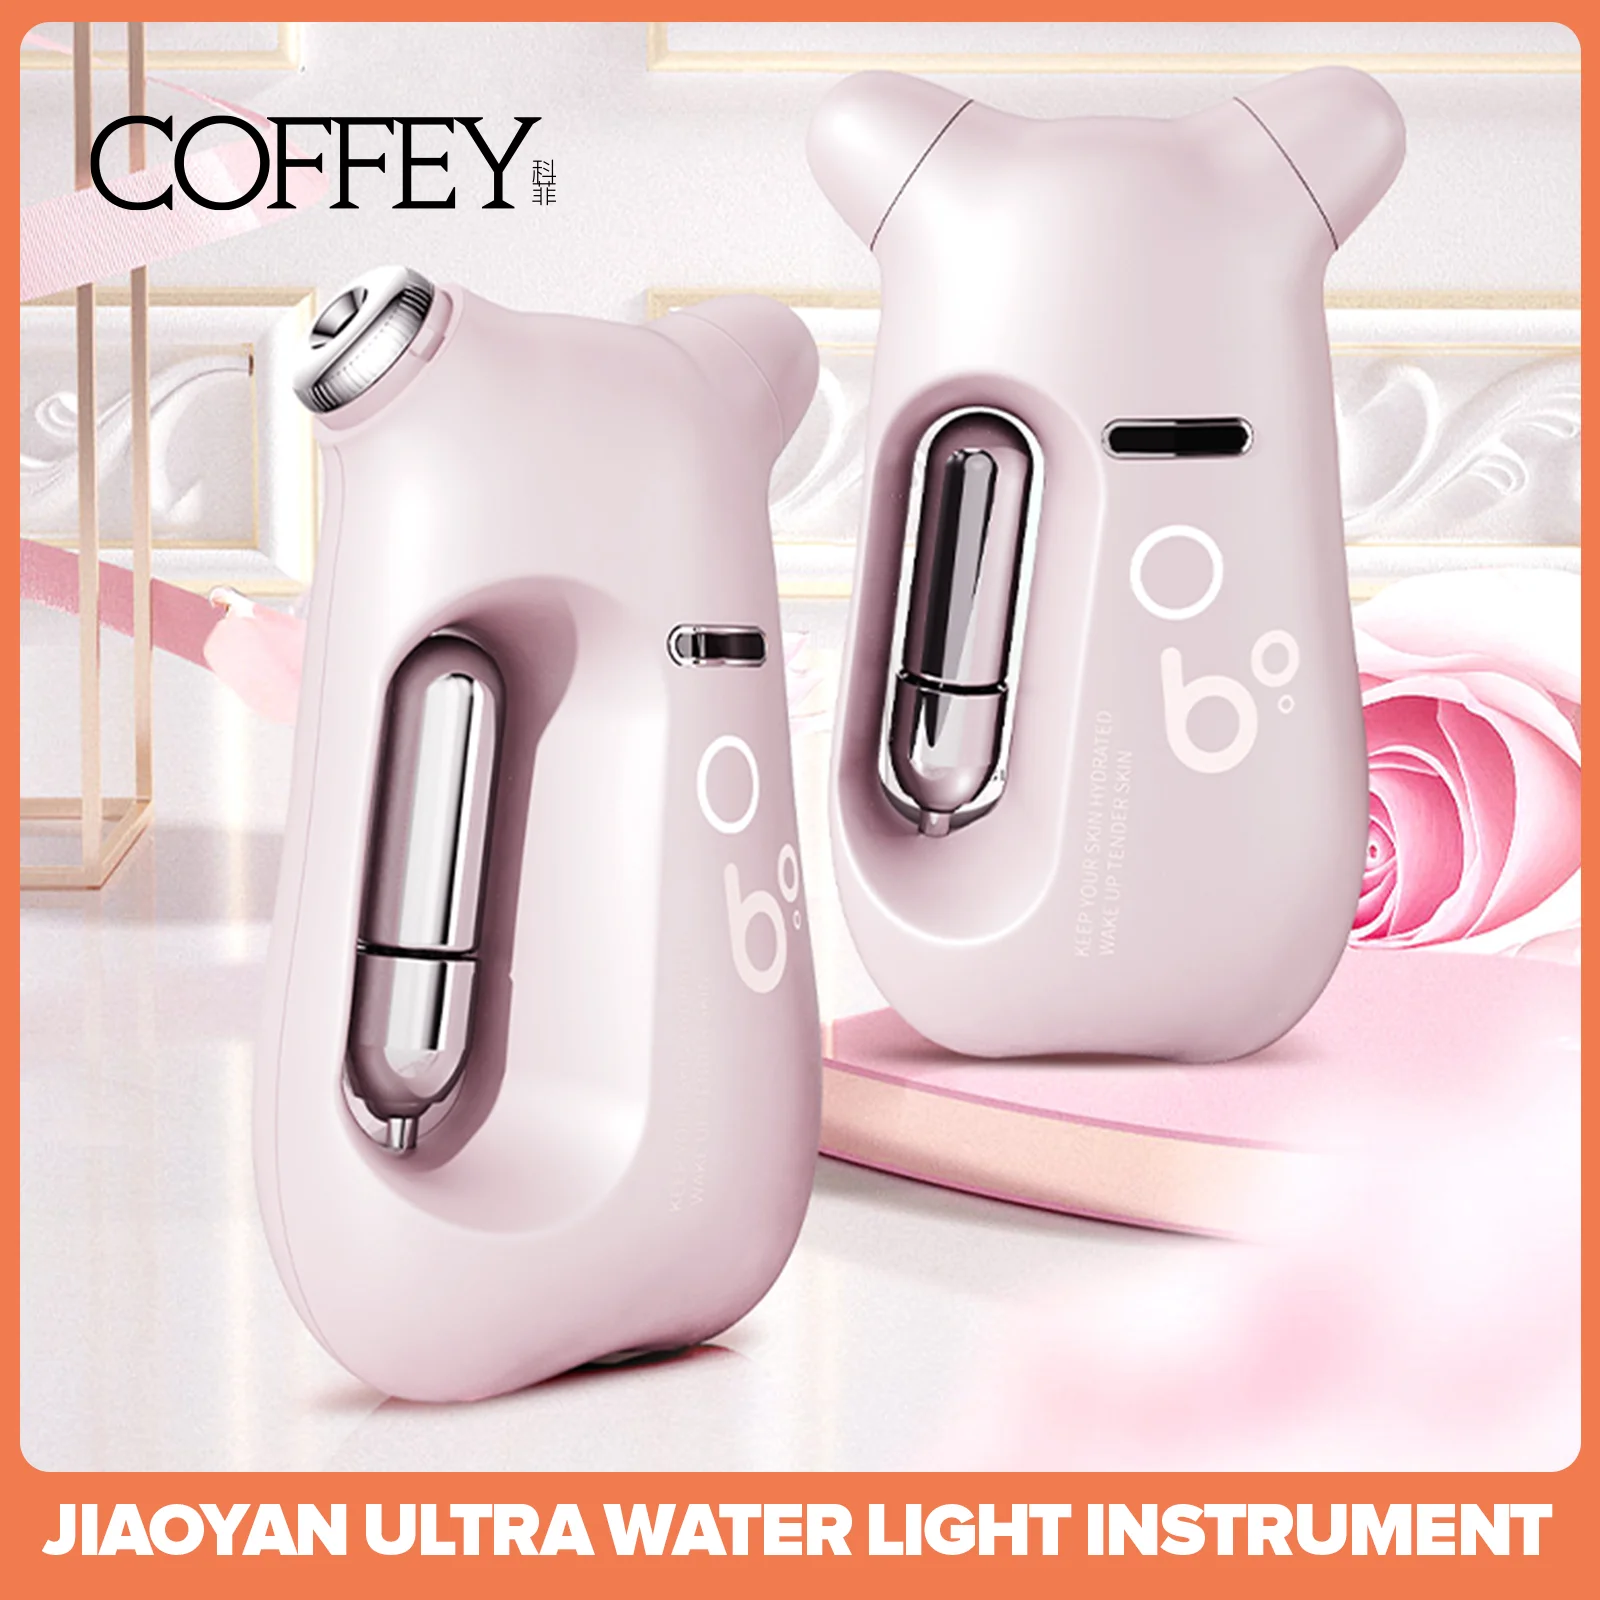 COFFEY High Pressure Nano Spray Face Humidifier USB Water Replenisher Atomized Replenishment Household Spray Beauty Instrument 18l industrial humidifier workshop printing textile factory sprayer humidification atomized water vapor greenhouse humidifier